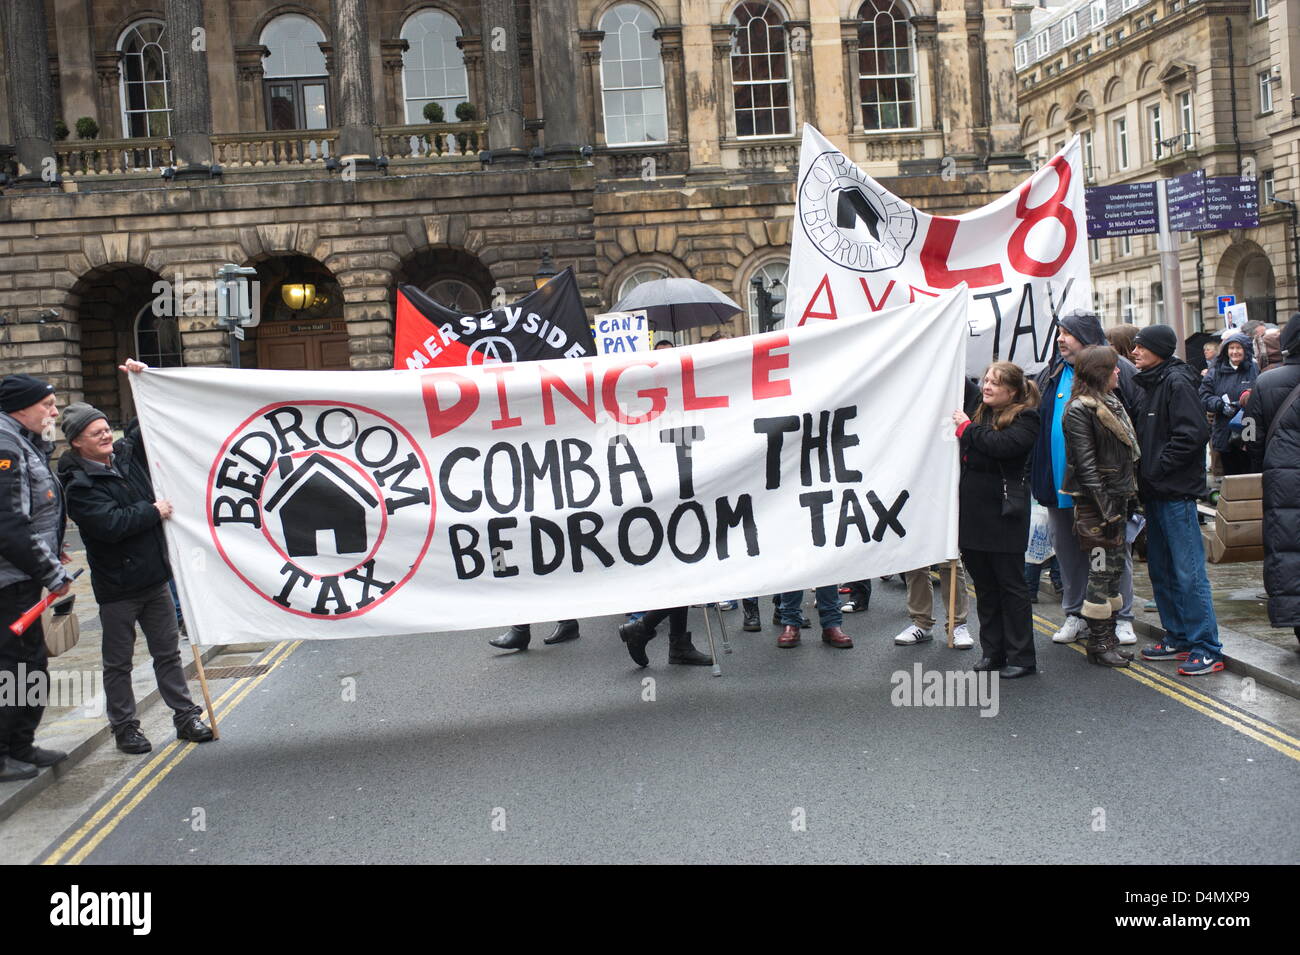 Liverpool, UK. Saturday 16th March 2013. Banners and signs as the Combat the Bedroom Tax group prepares to march to the demonstration. As part of nationwide protests, campaigners gathered in Liverpool city centre to demonstrate against a new 'bedroom tax' that will cut benefits to people with a spare room. Credit: David Colbran/Alamy Live News Stock Photo